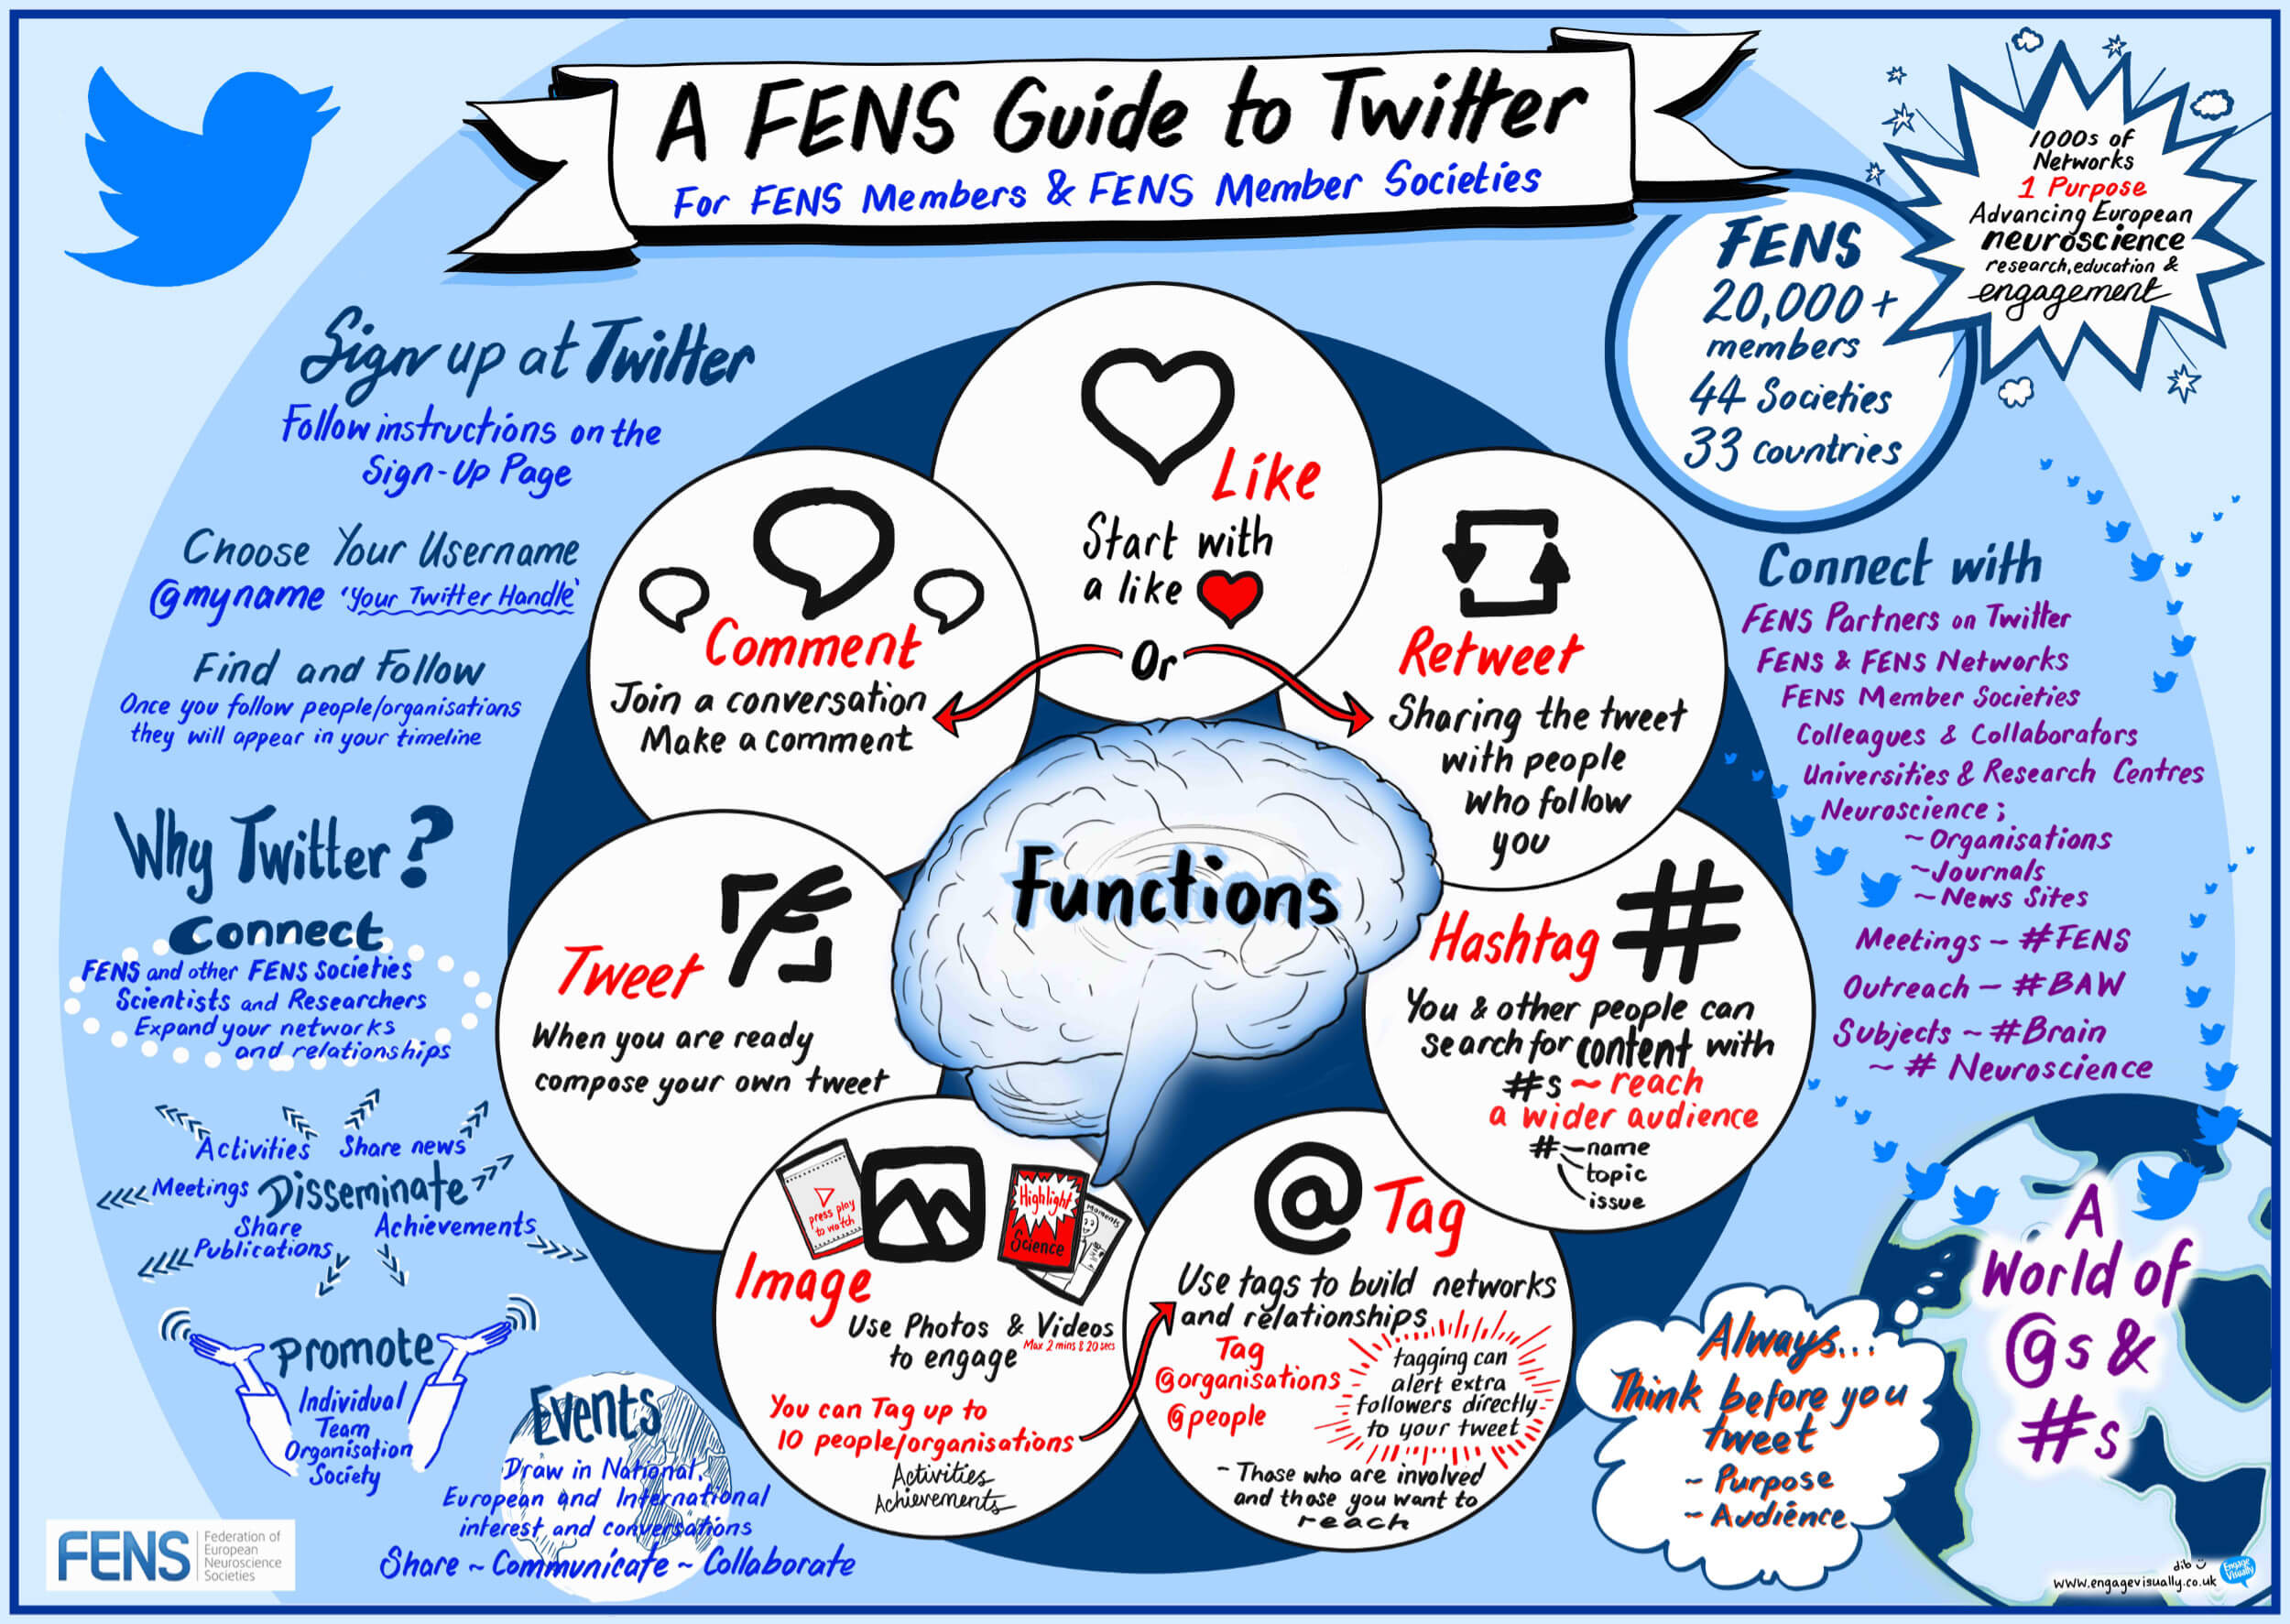 A FENS guide to Twitter